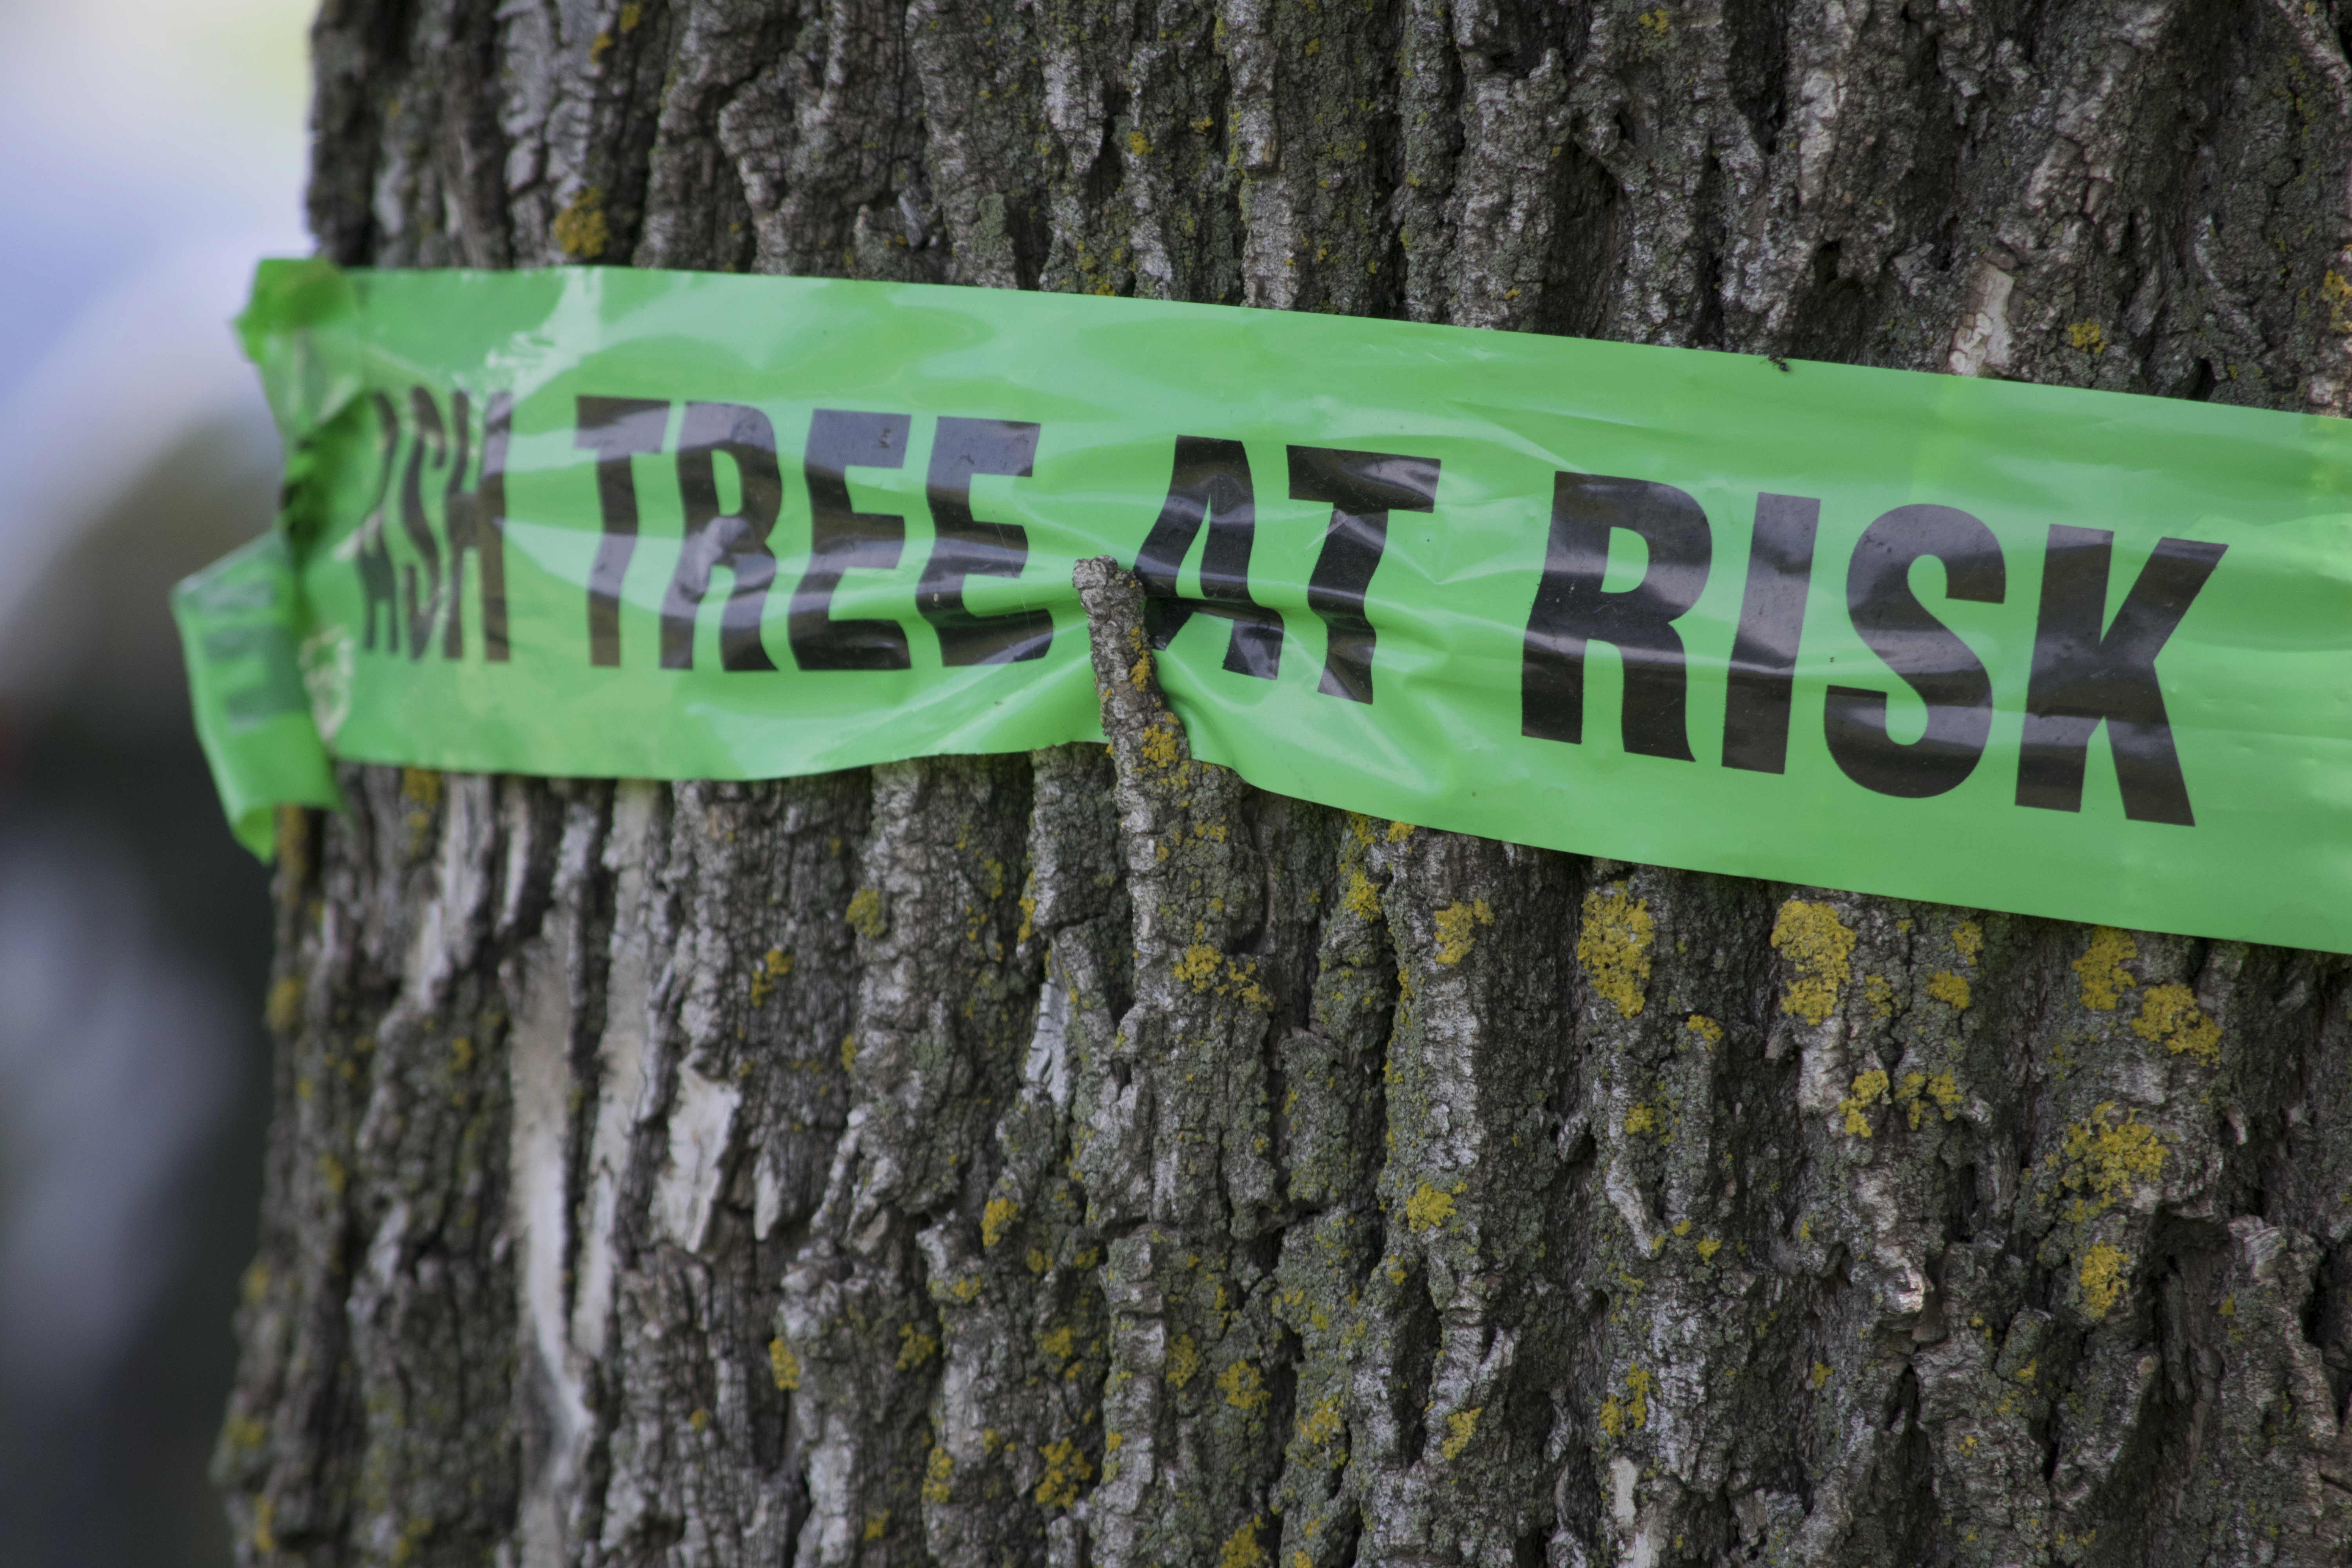 Emerald ash borers are damaging ash trees, putting hunters at risk.